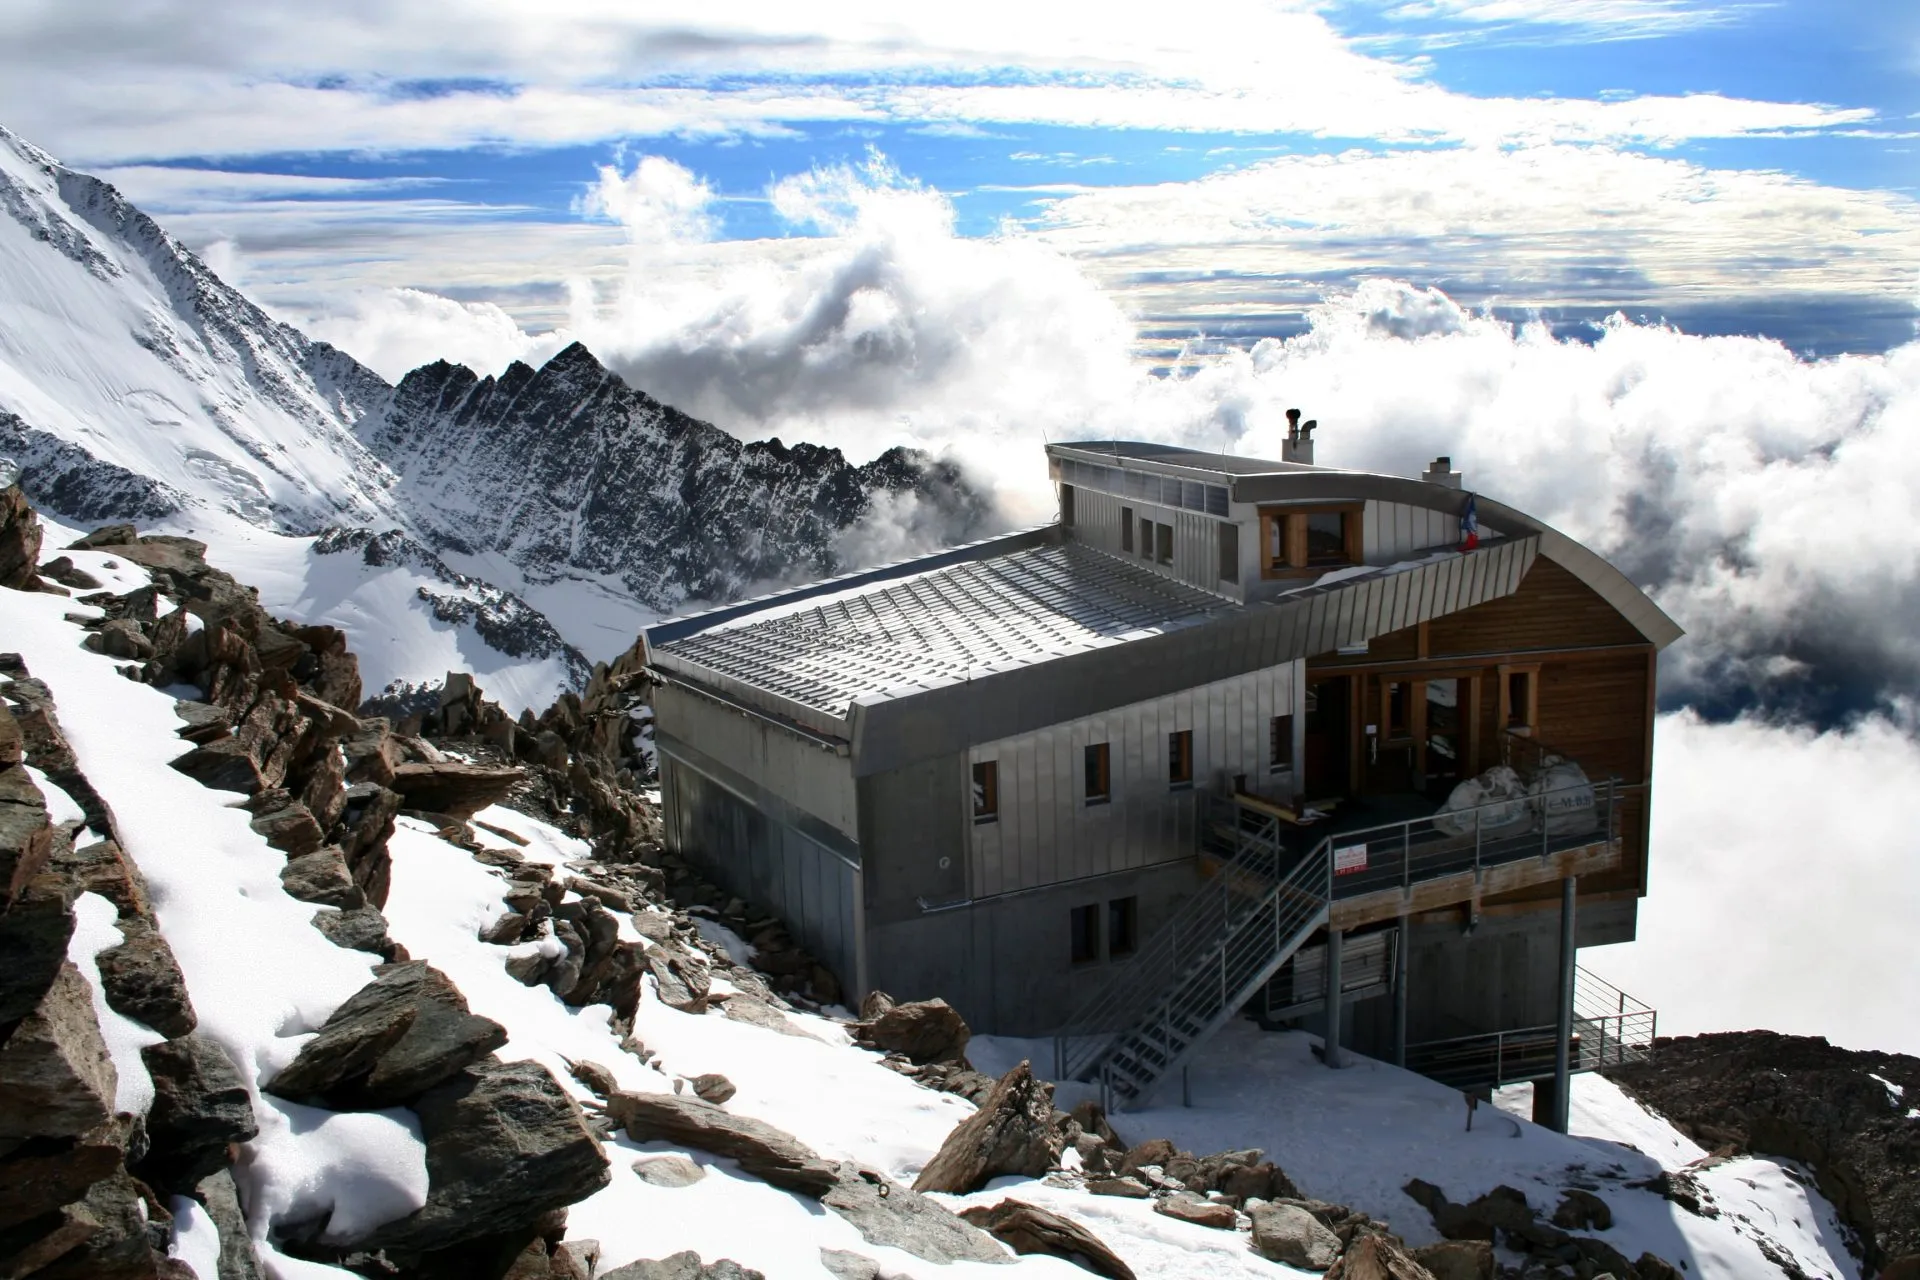 tete rousse mountain hut in snow scaled